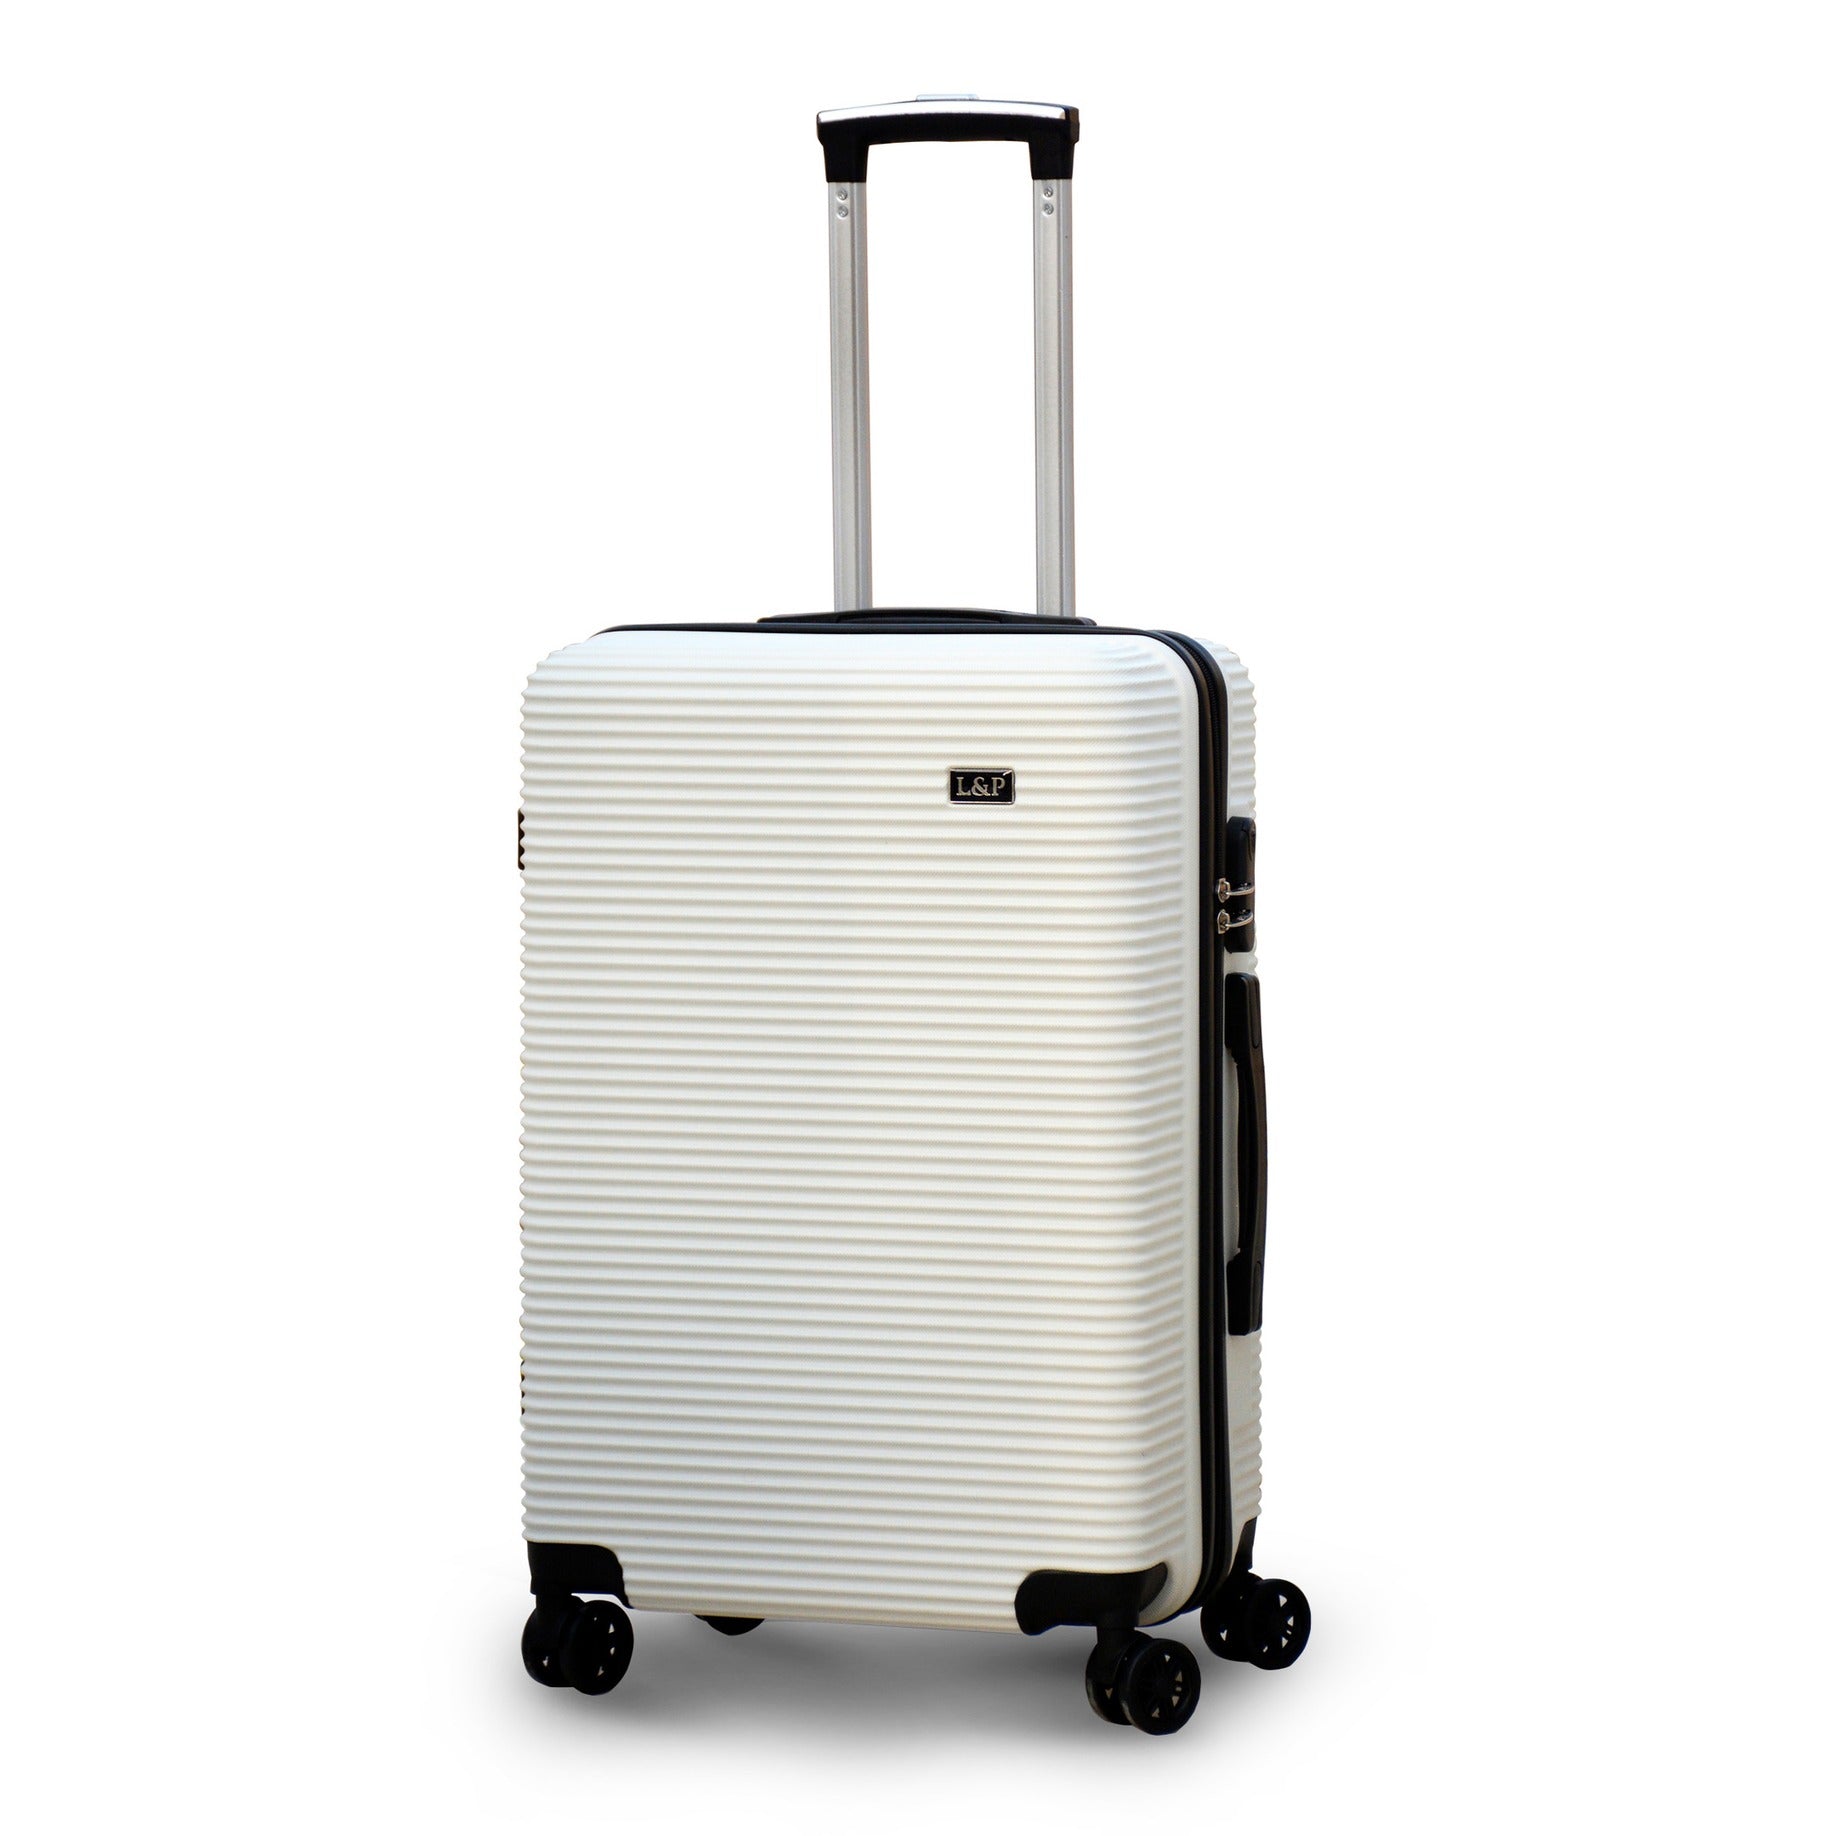 3 Piece Full Set 20" 24" 28 Inches White Colour JIAN ABS Line Luggage lightweight Hard Case Trolley Bag With Spinner Wheel